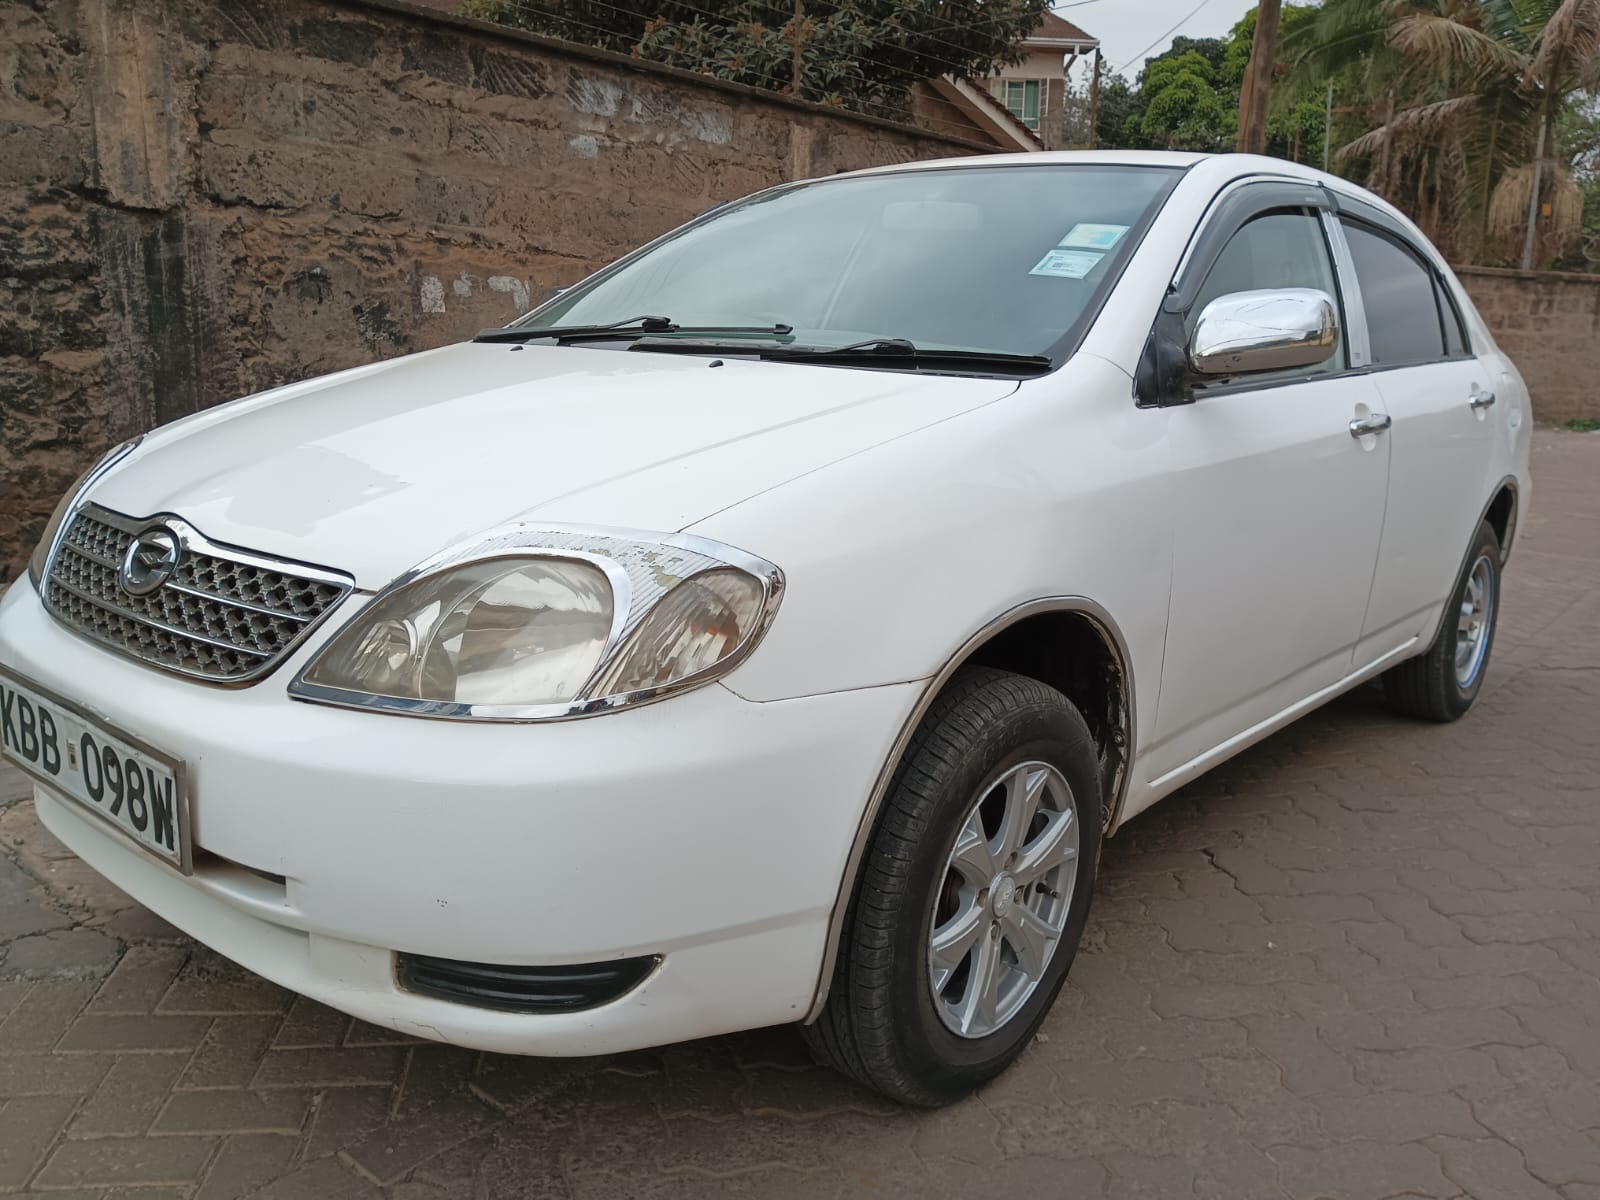 Toyota Corolla NZE 2001 Pay 20% Deposit ONLY